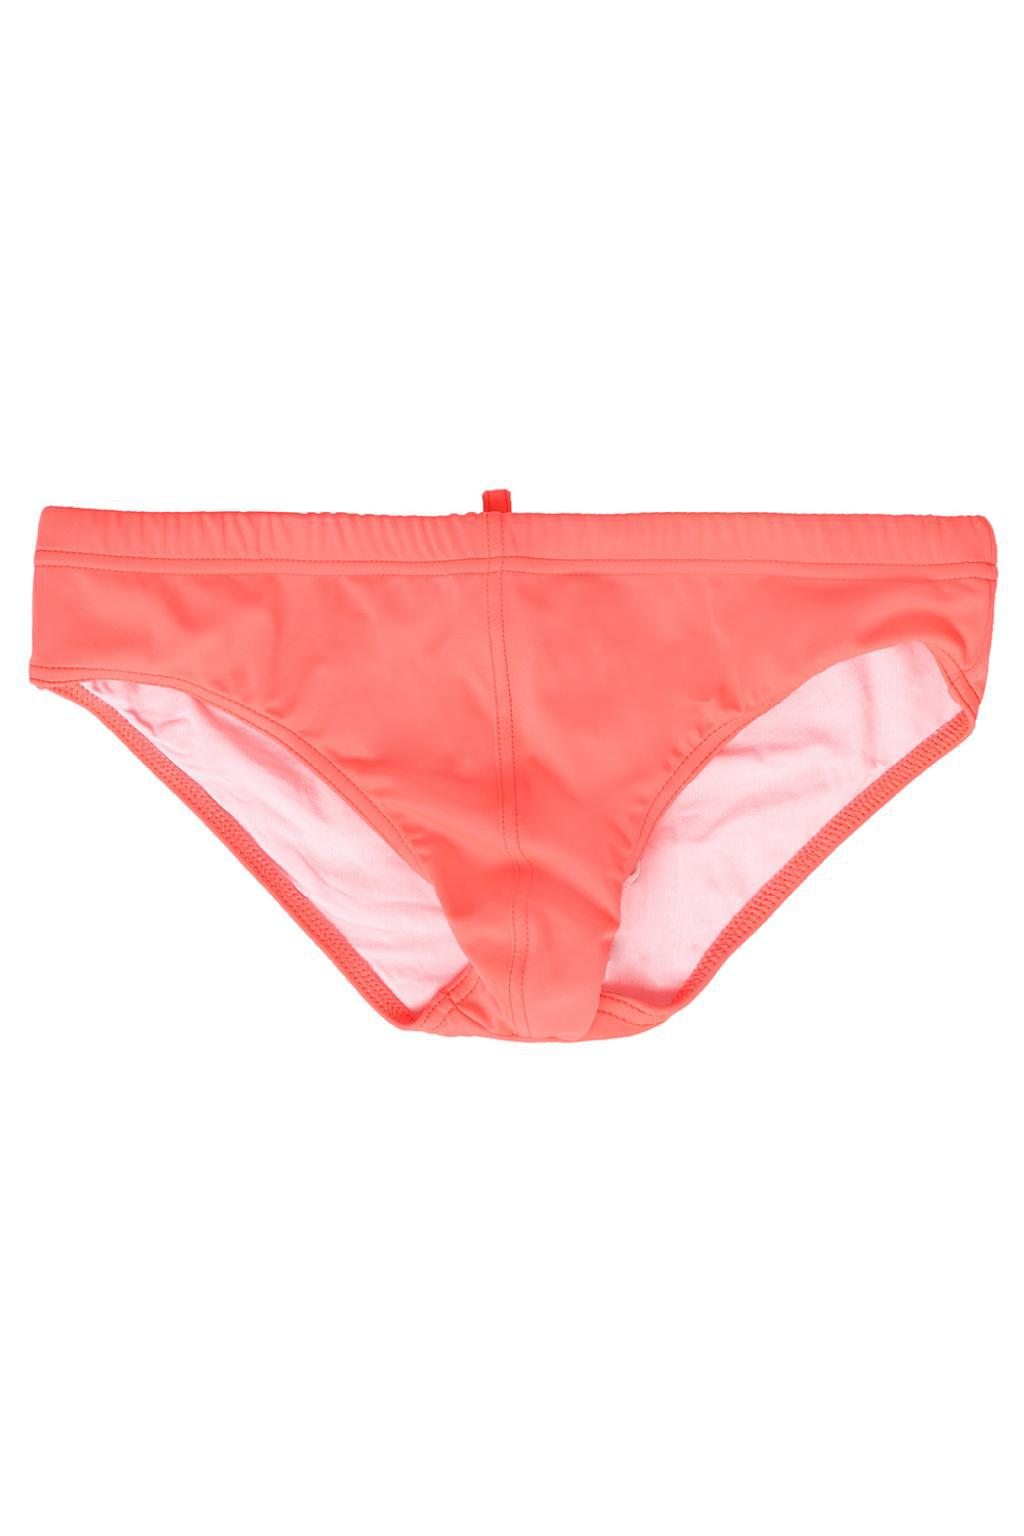 DSquared² Synthetic Printed Swim Trunks in Pink for Men - Lyst